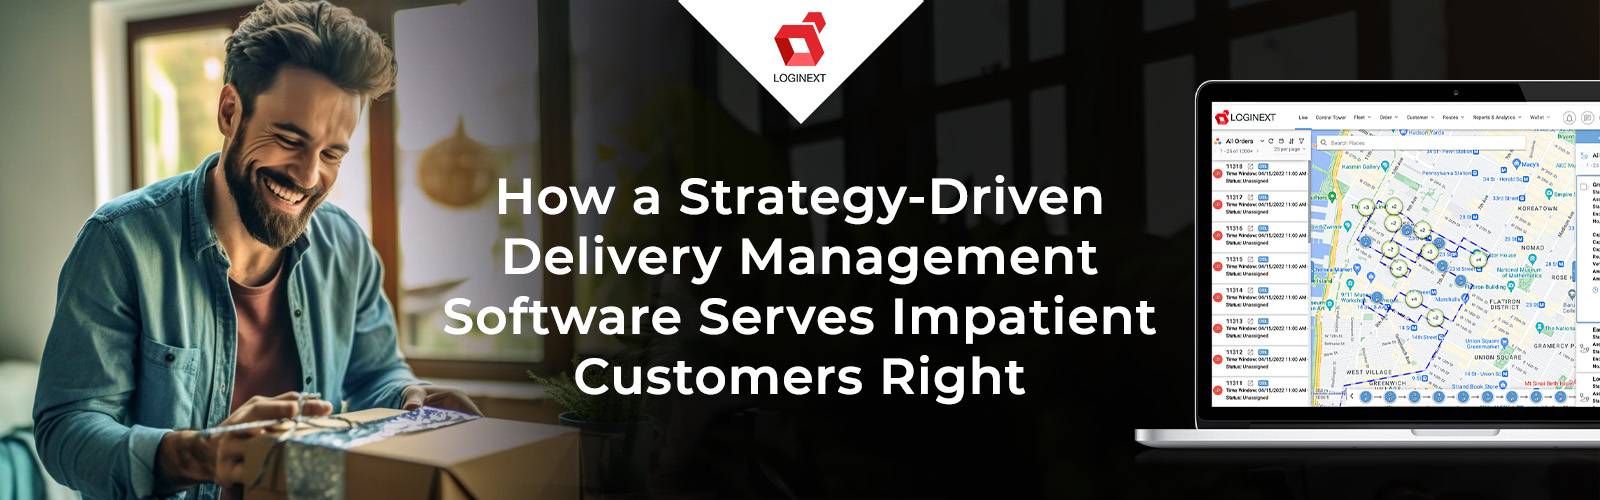 Best Delivery Management Software For On-demand Delivery